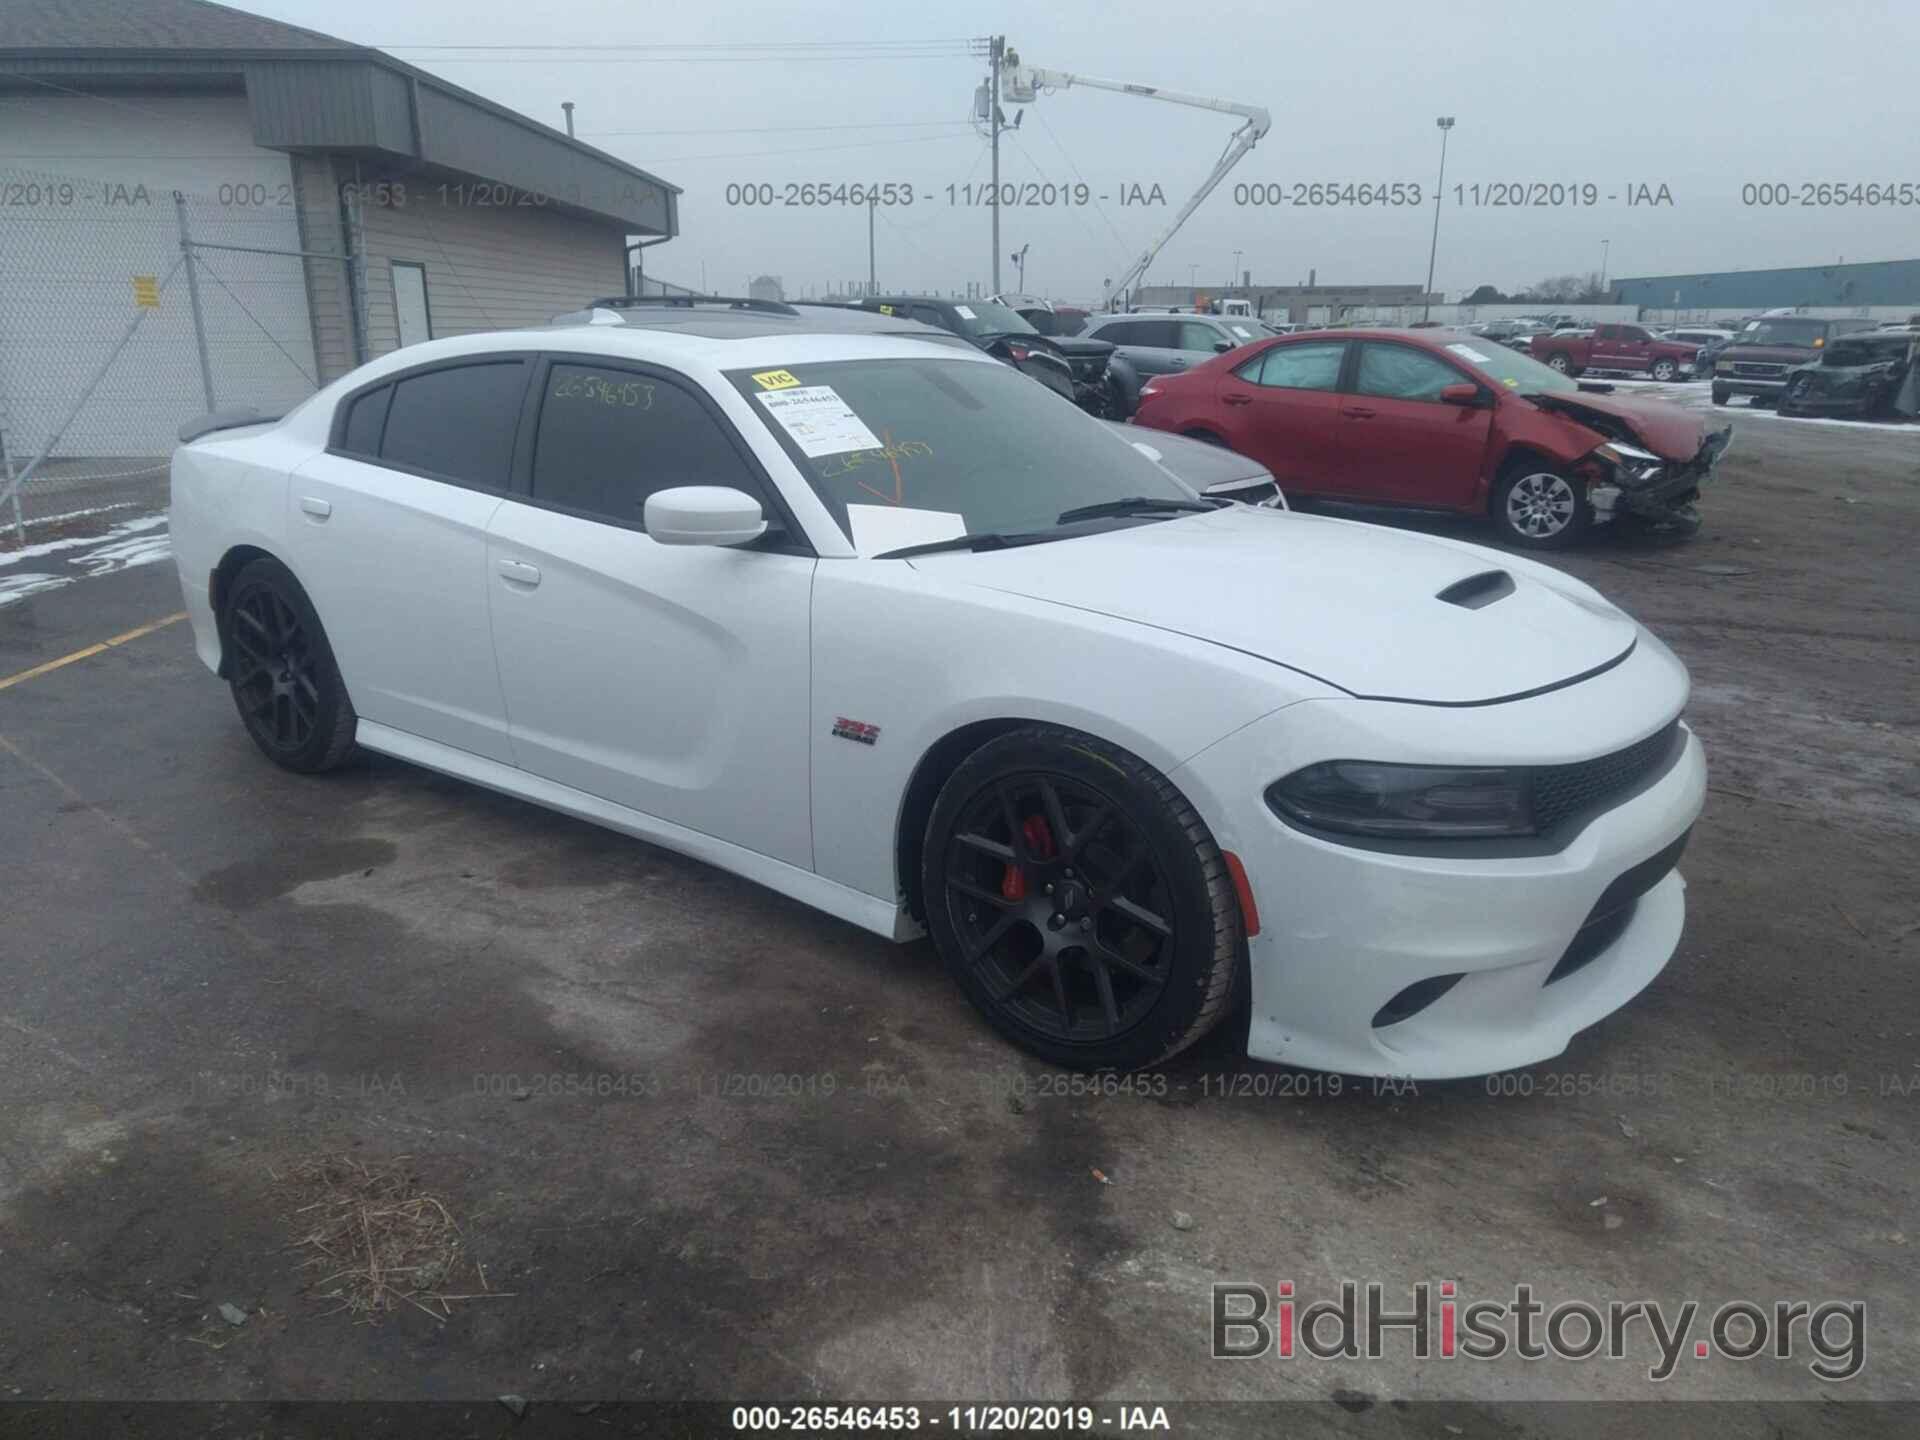 Photo 100000000015169WI - DODGE CHARGER 2017